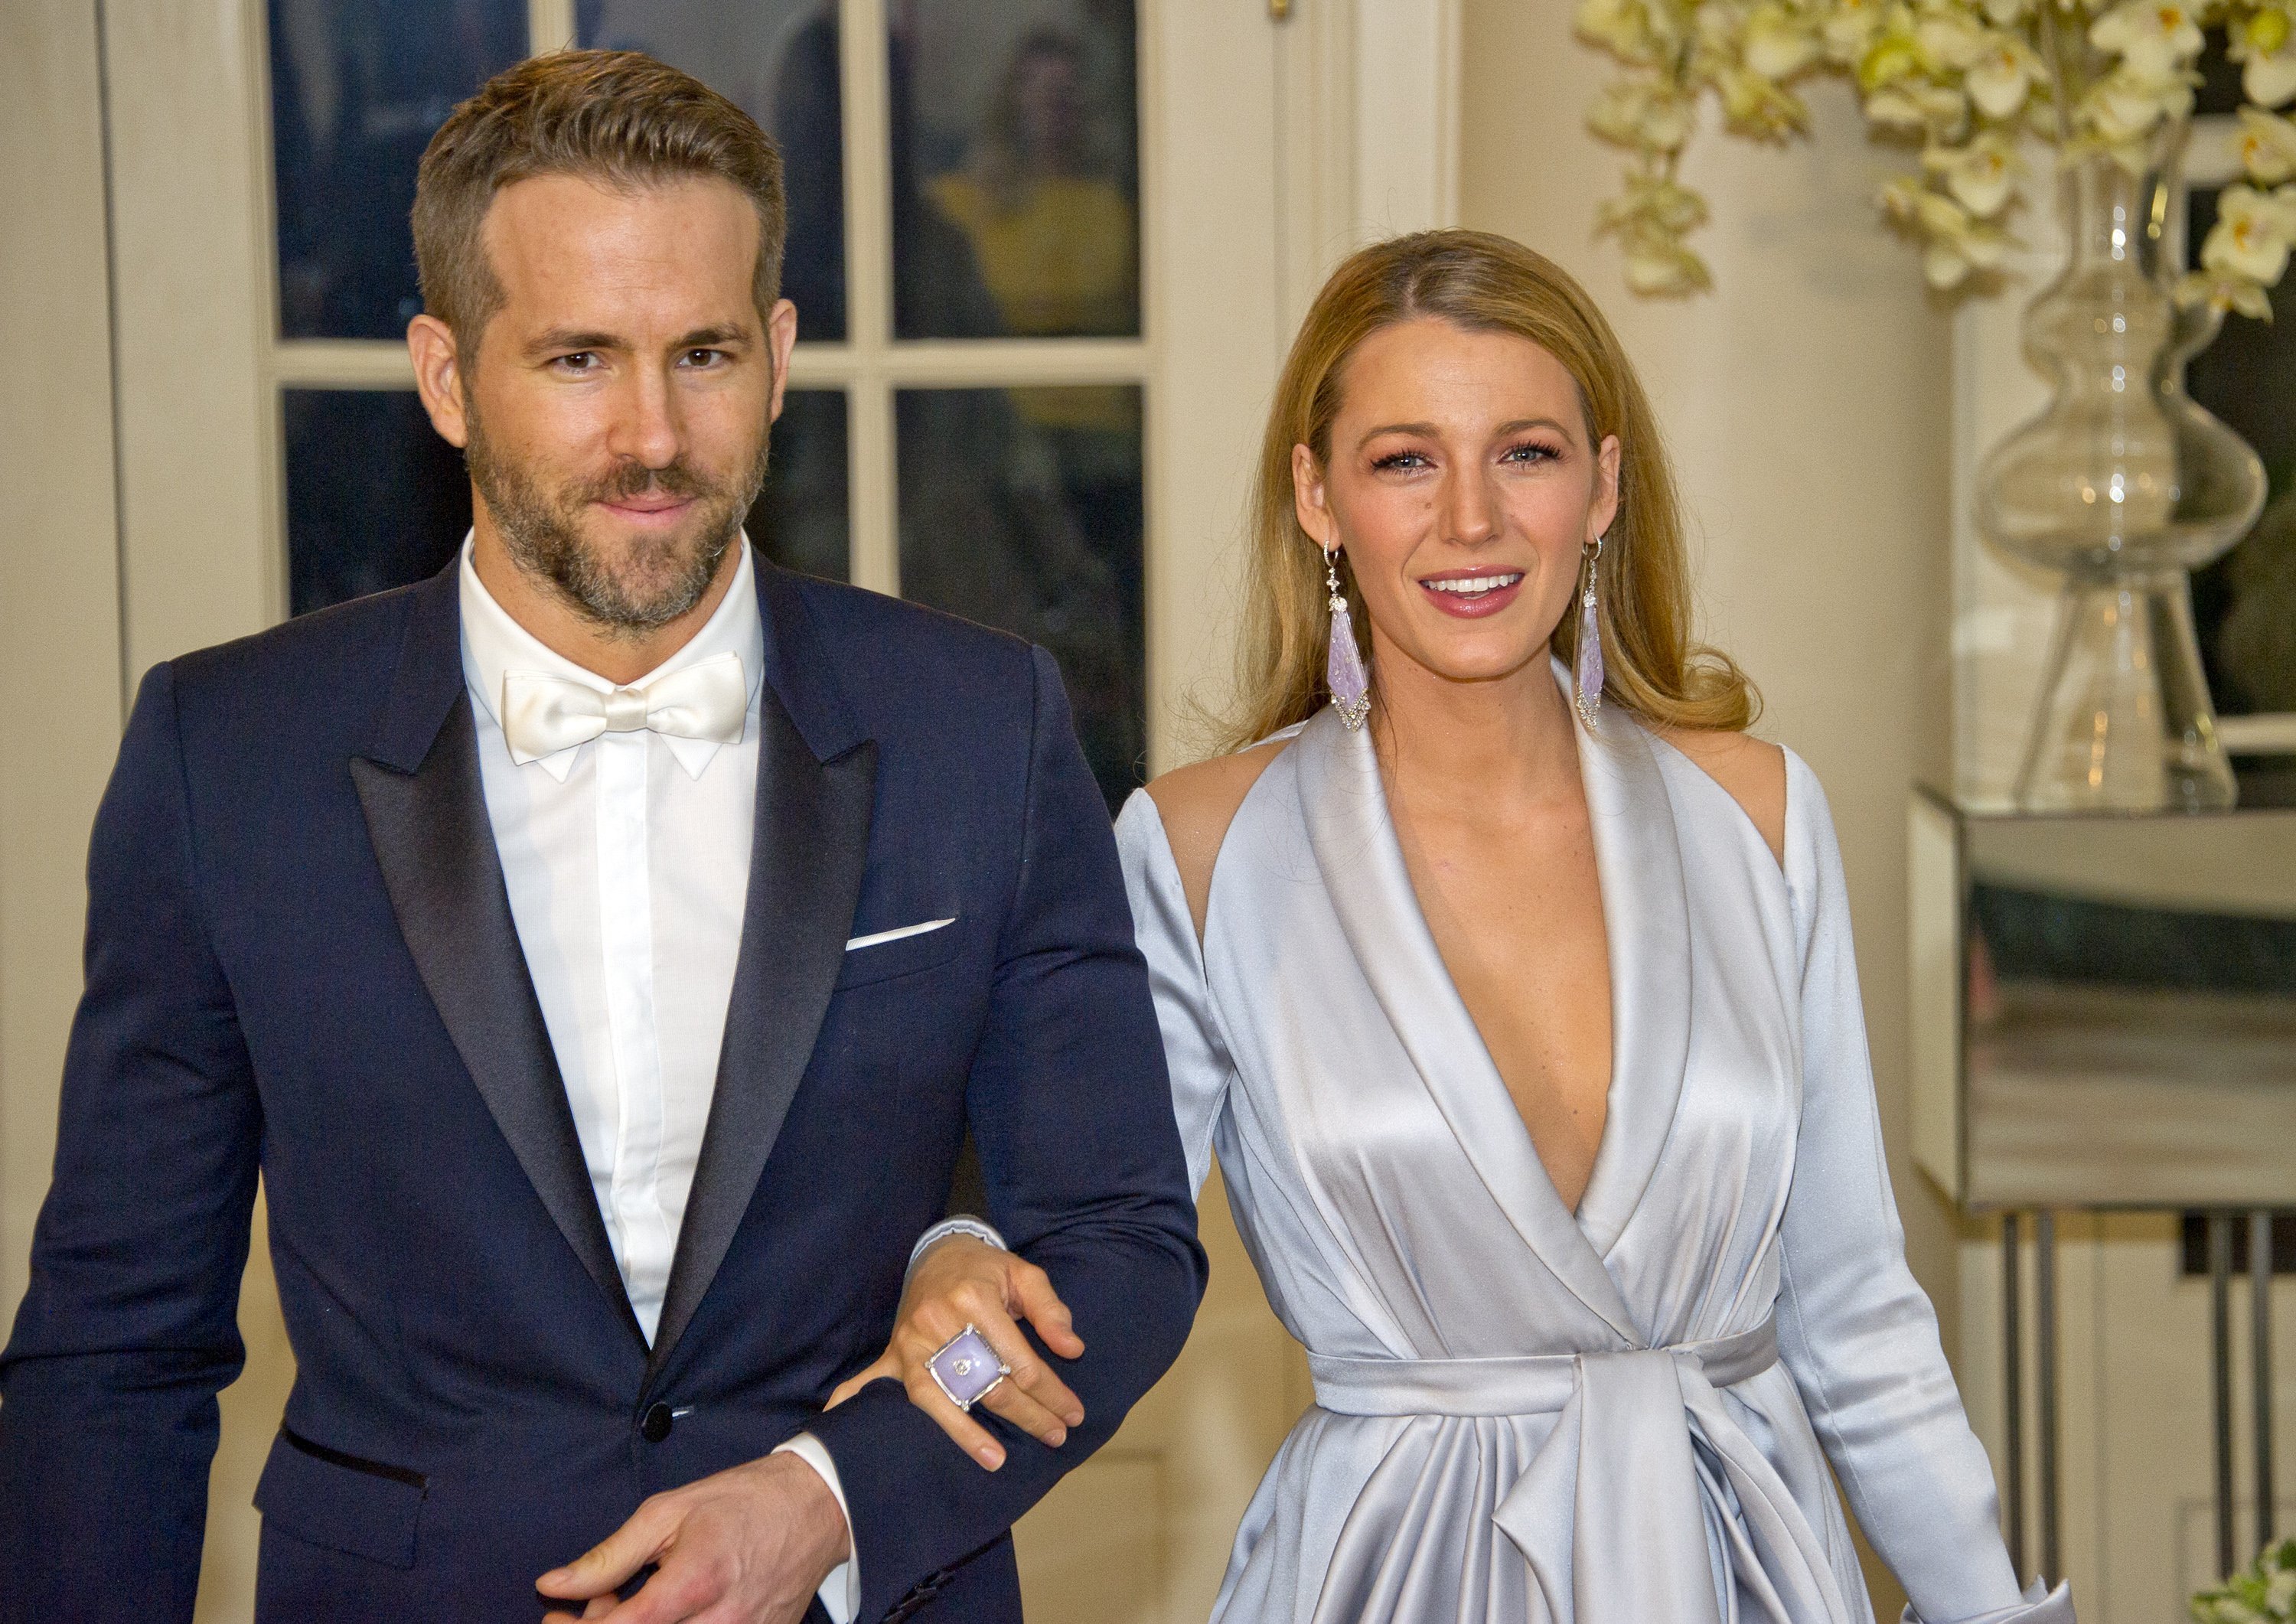 Ryan Reynolds and Blake Lively arrive for the State Dinner at the White House March 10, 2016. | Source: Getty Images